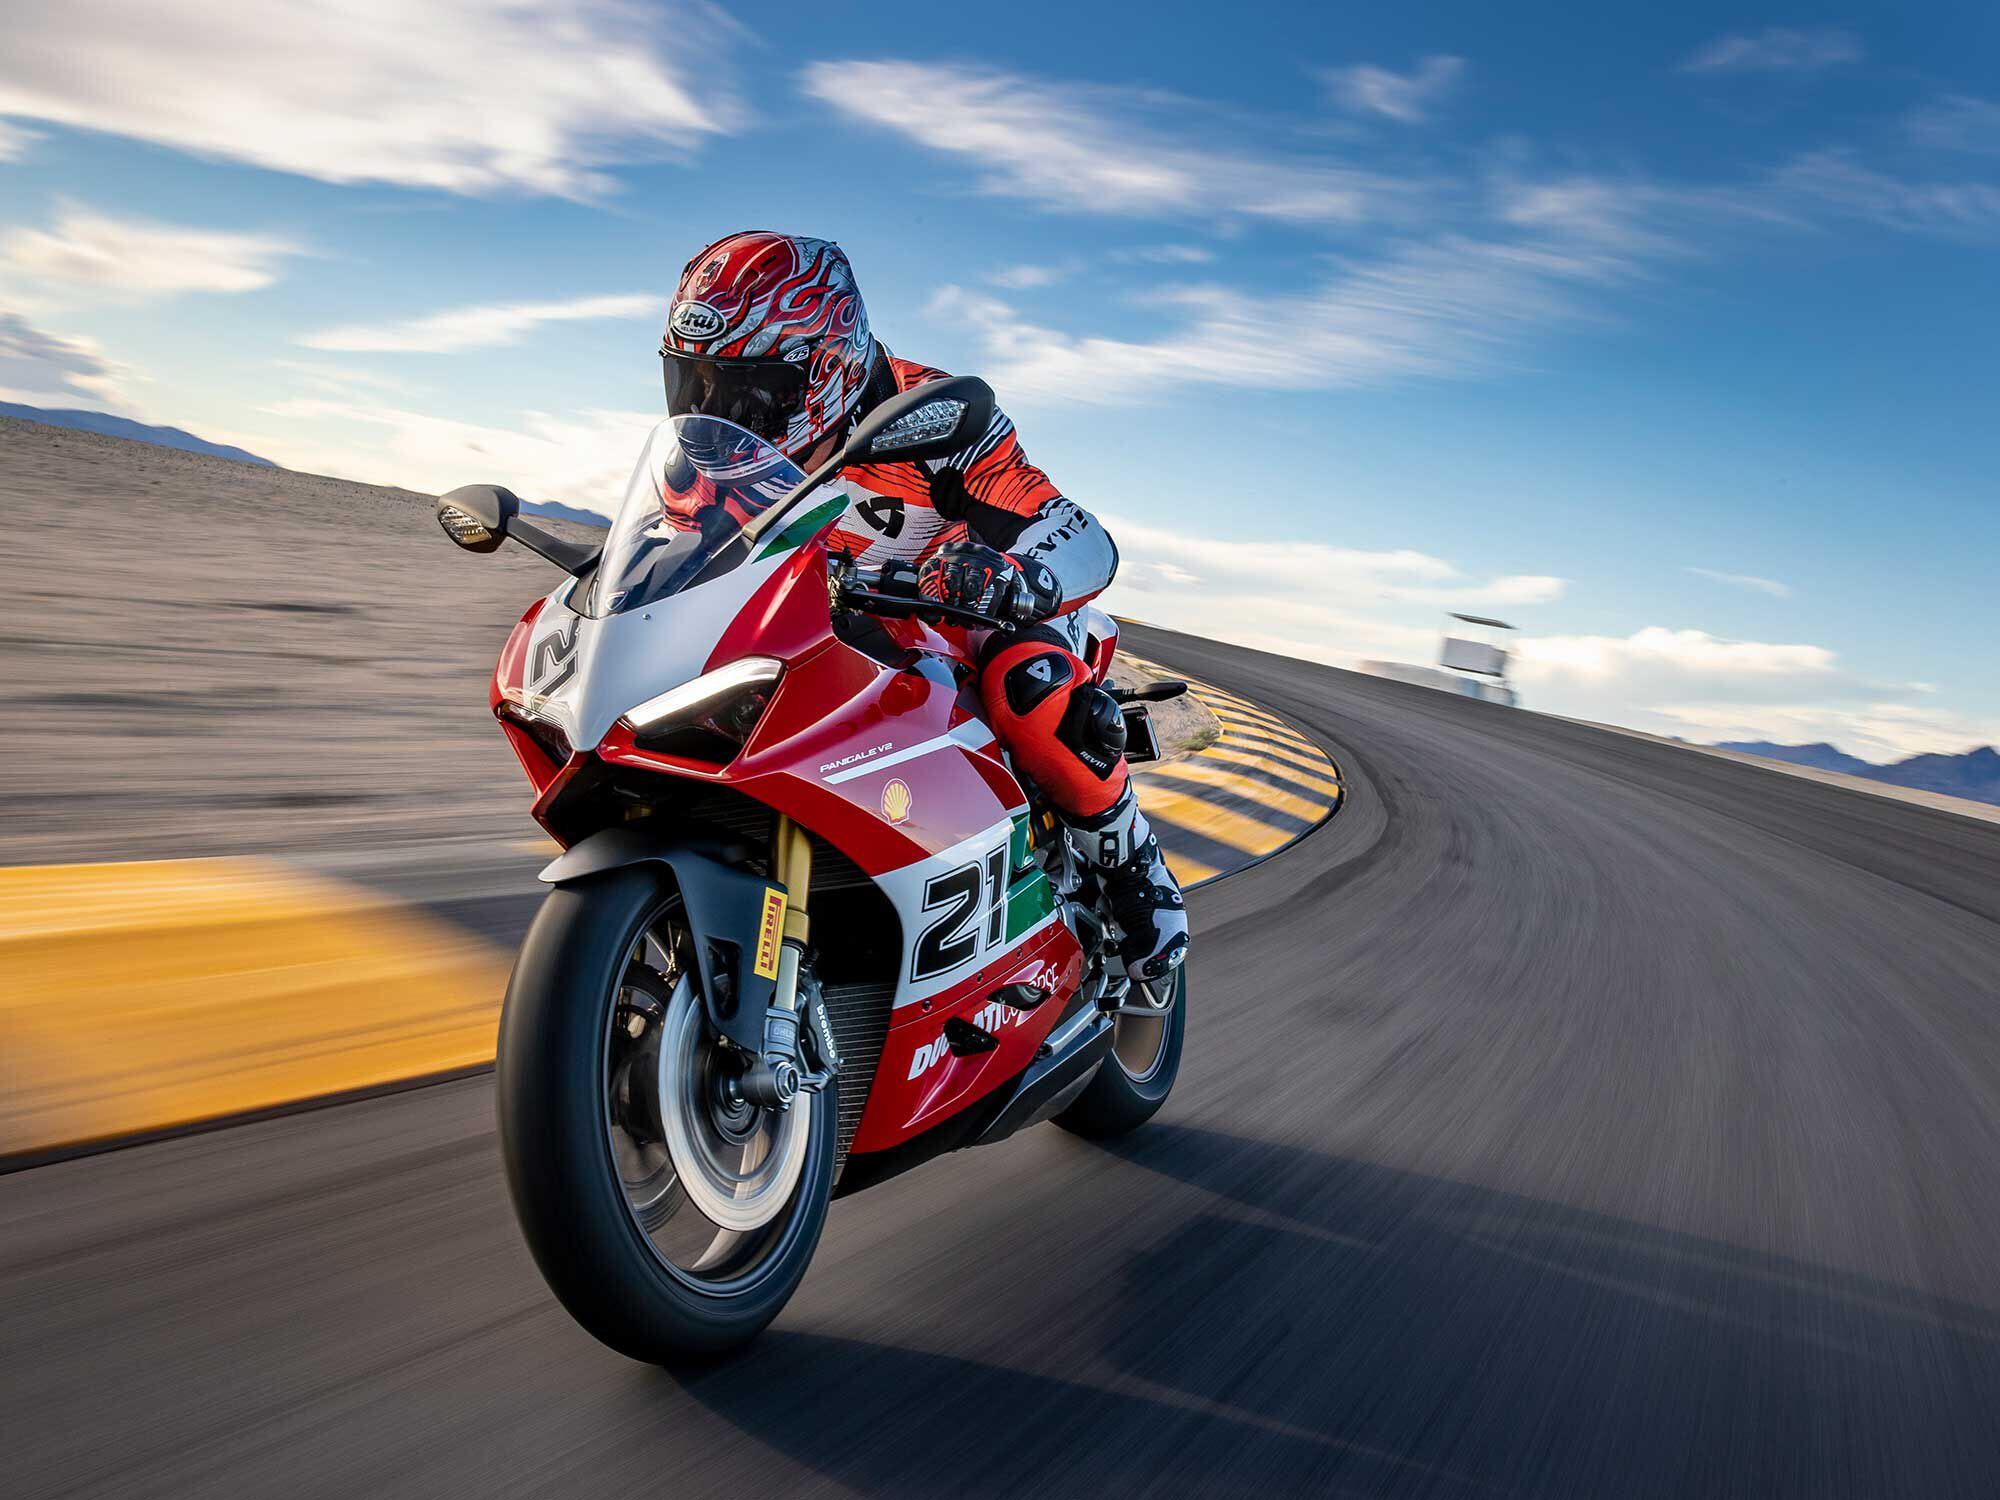 Ducati’s Panigale V2 Bayliss was born for trackdays.